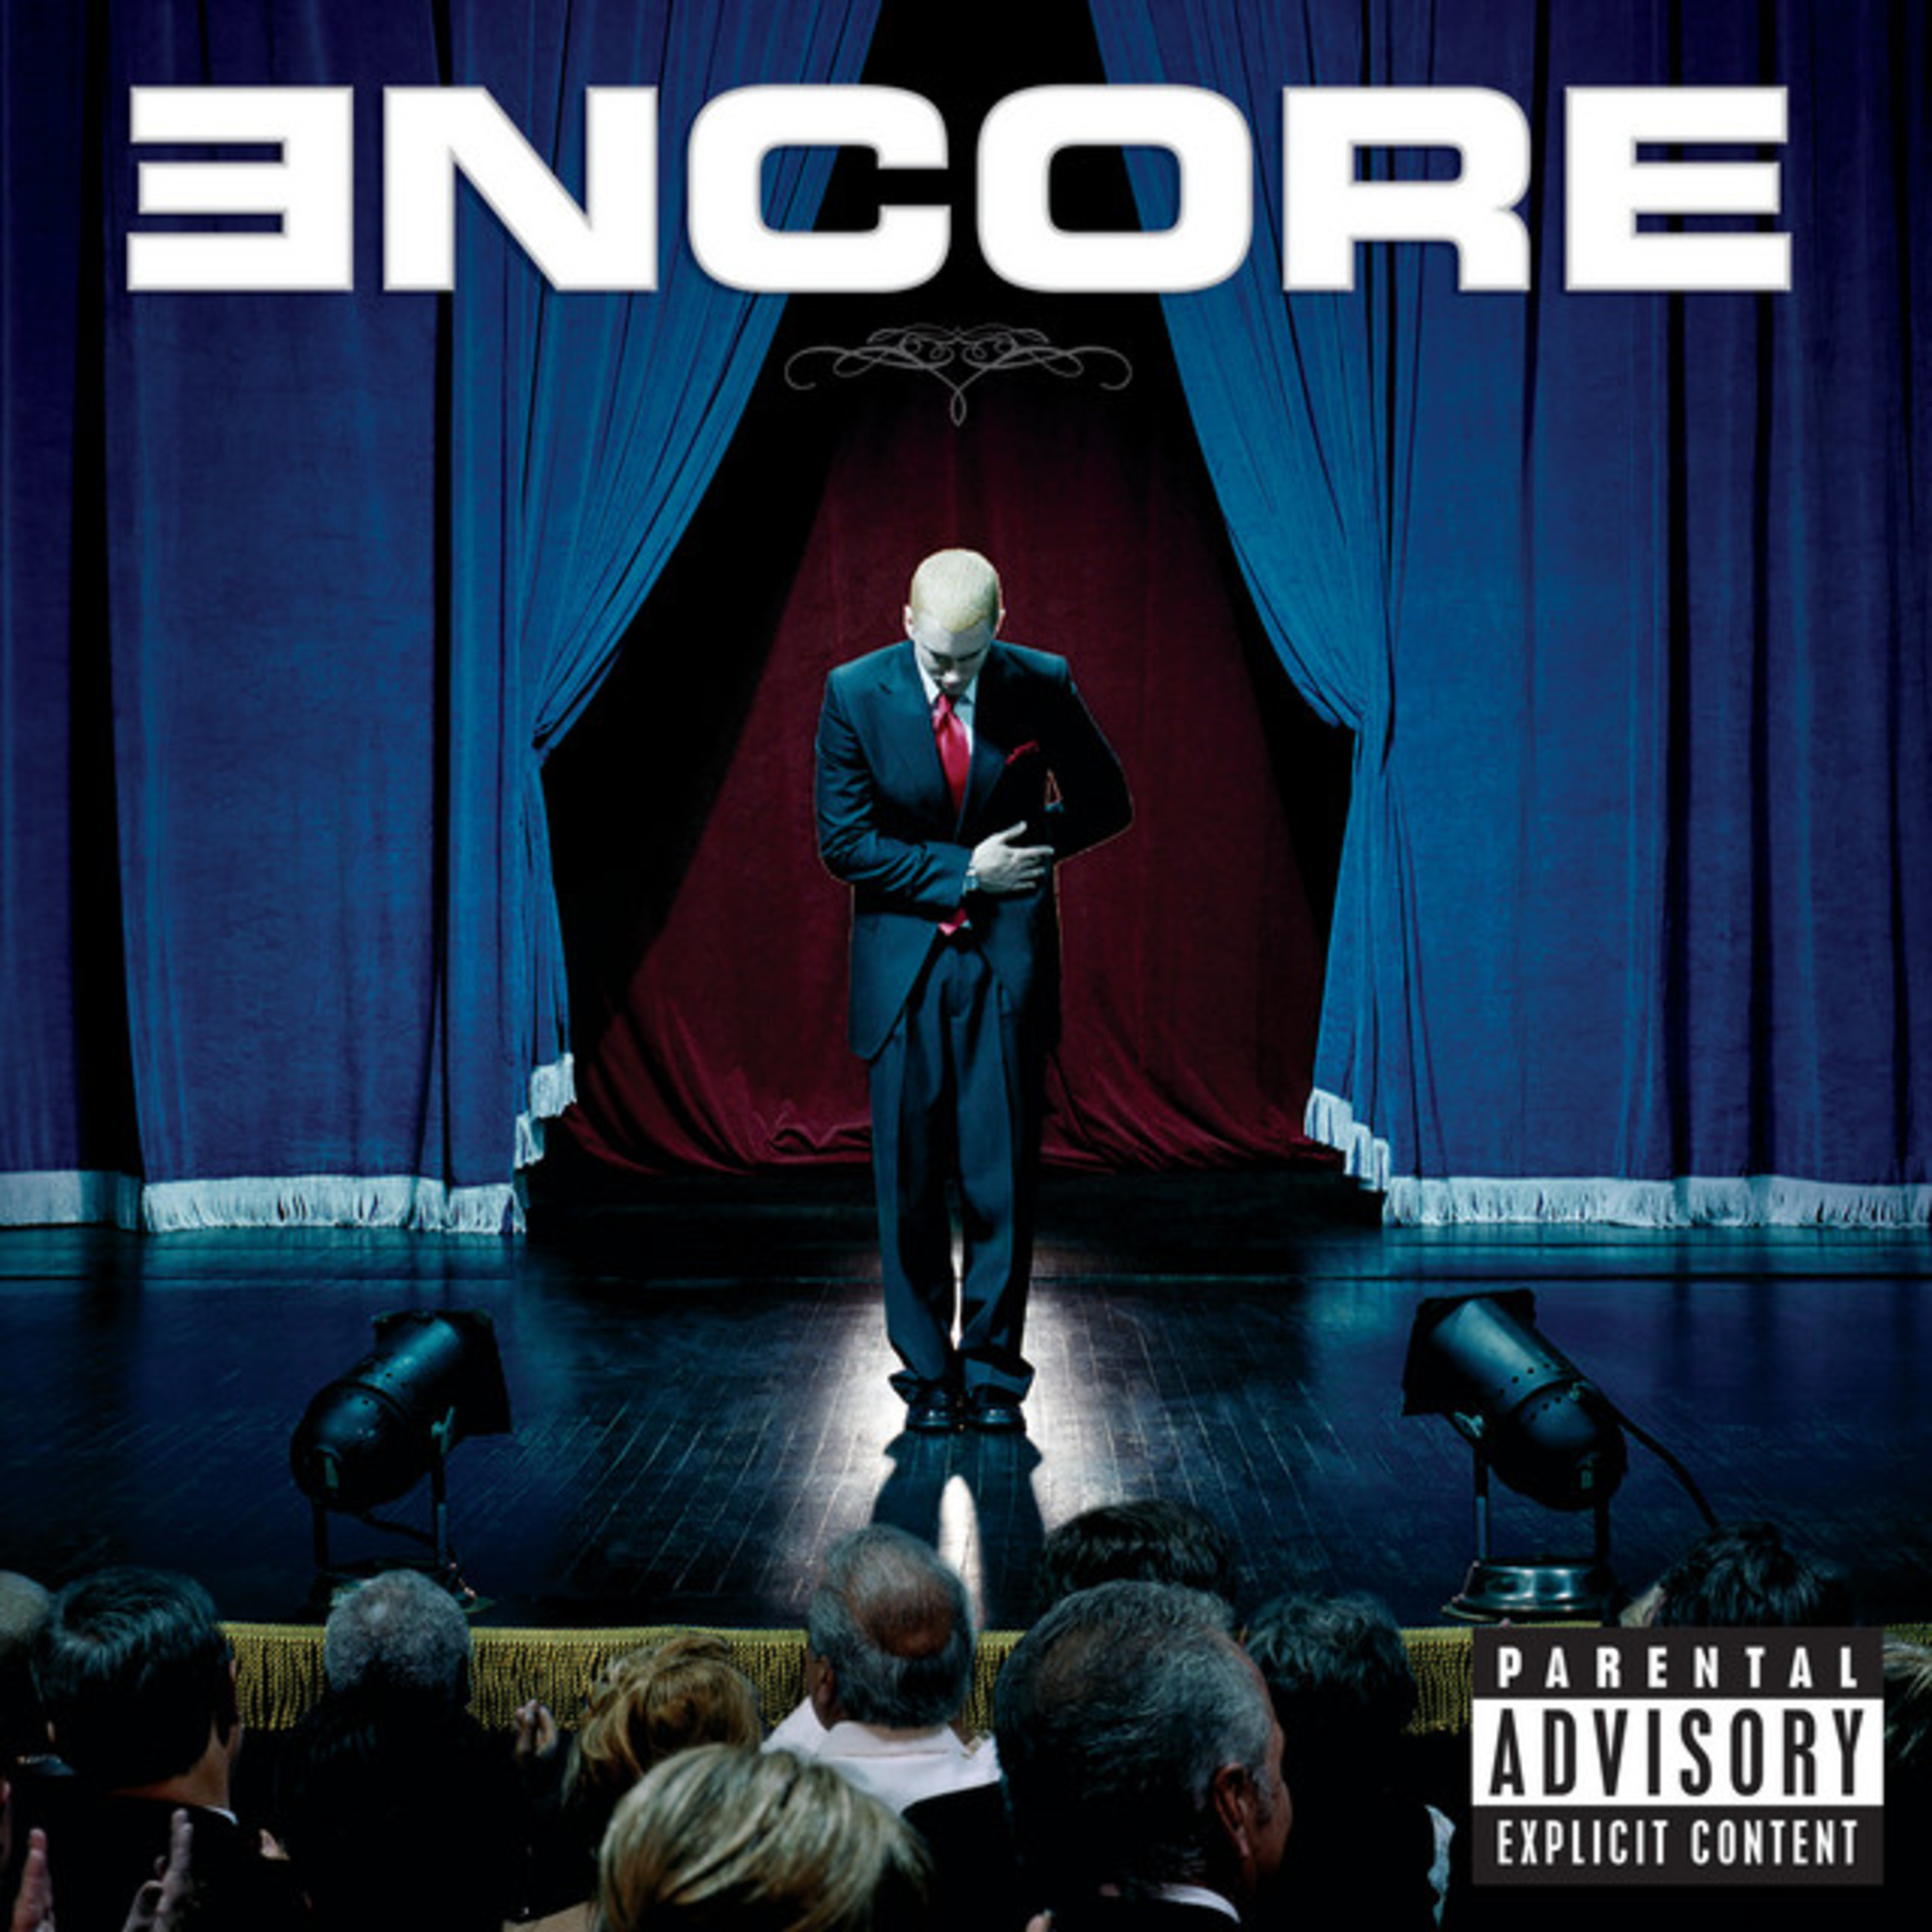 <p>After the success of his 2002 album, <em>The Eminem Show</em>, Eminem returned in 2004 with <em>Encore.</em> In a matter of ten days post-release, the rapper sold over 1.5 million copies, and it debuted at No. 1 on <em>Billboard</em> 200. Some of the album singles included "Like Toy Soldiers" and <a href="https://www.youtube.com/watch?v=9dcVOmEQzKA">"Just Lose It."</a> Naturally, almost half of the songs are co-produced by frequent collaborator Dr. Dre. </p><p><a href='https://www.msn.com/en-us/community/channel/vid-cj9pqbr0vn9in2b6ddcd8sfgpfq6x6utp44fssrv6mc2gtybw0us'>Follow us on MSN to see more of our exclusive entertainment content.</a></p>